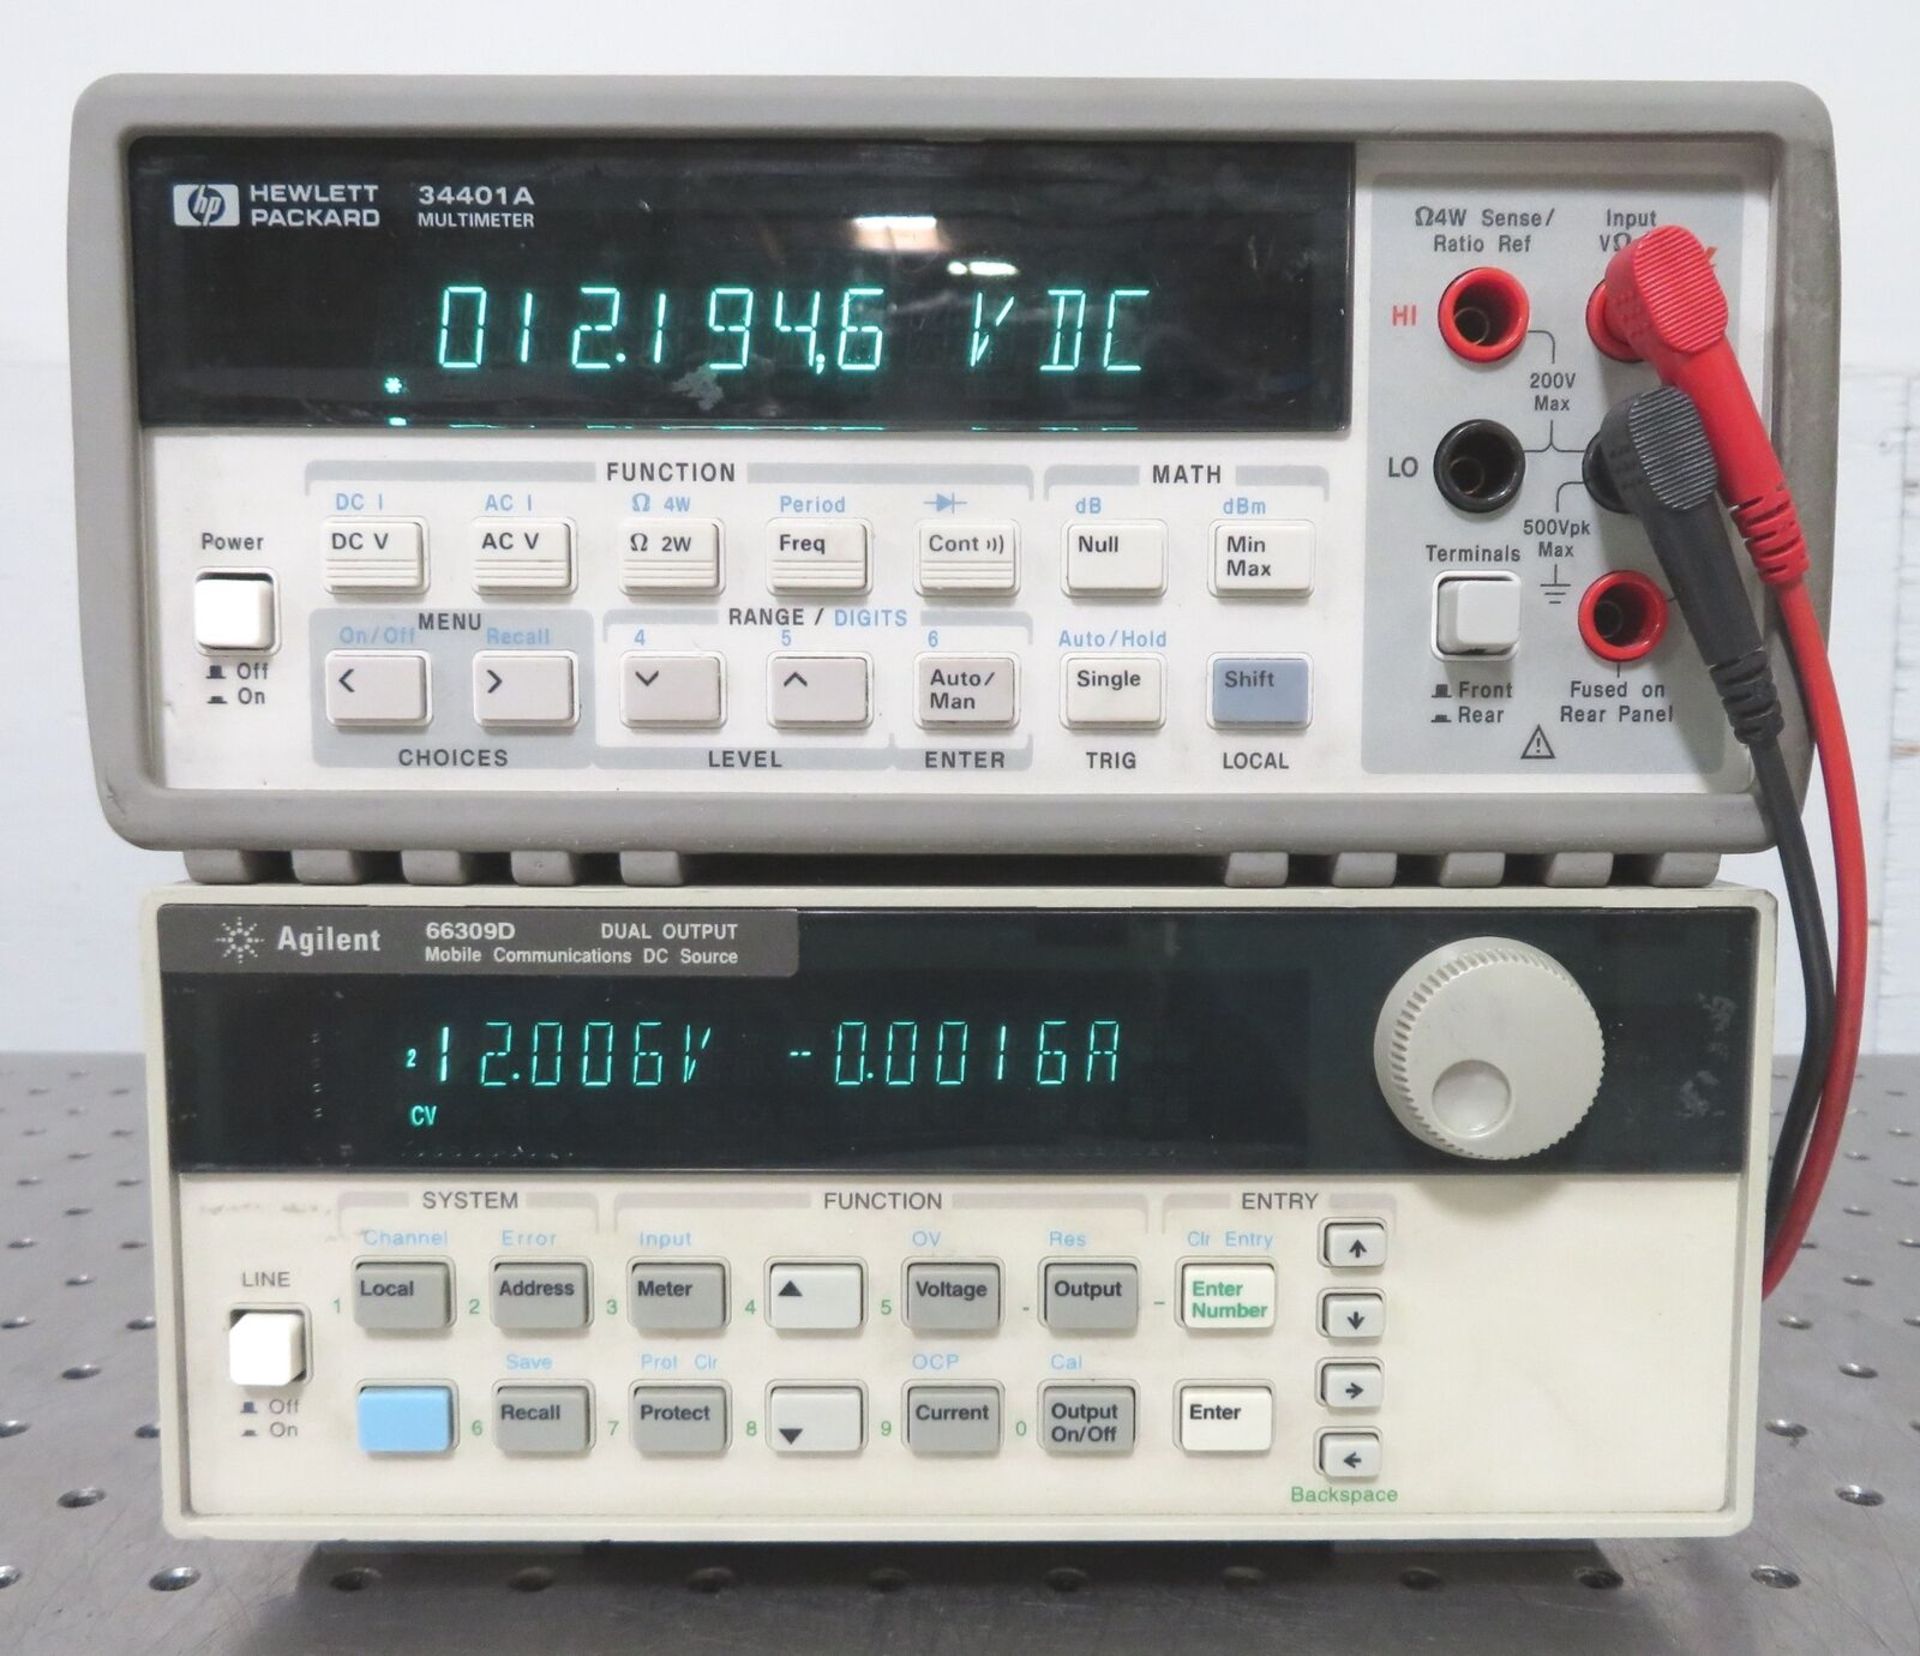 Agilent 66309D Dual Output Mobile Communications DC Source - Gilroy - Image 4 of 6